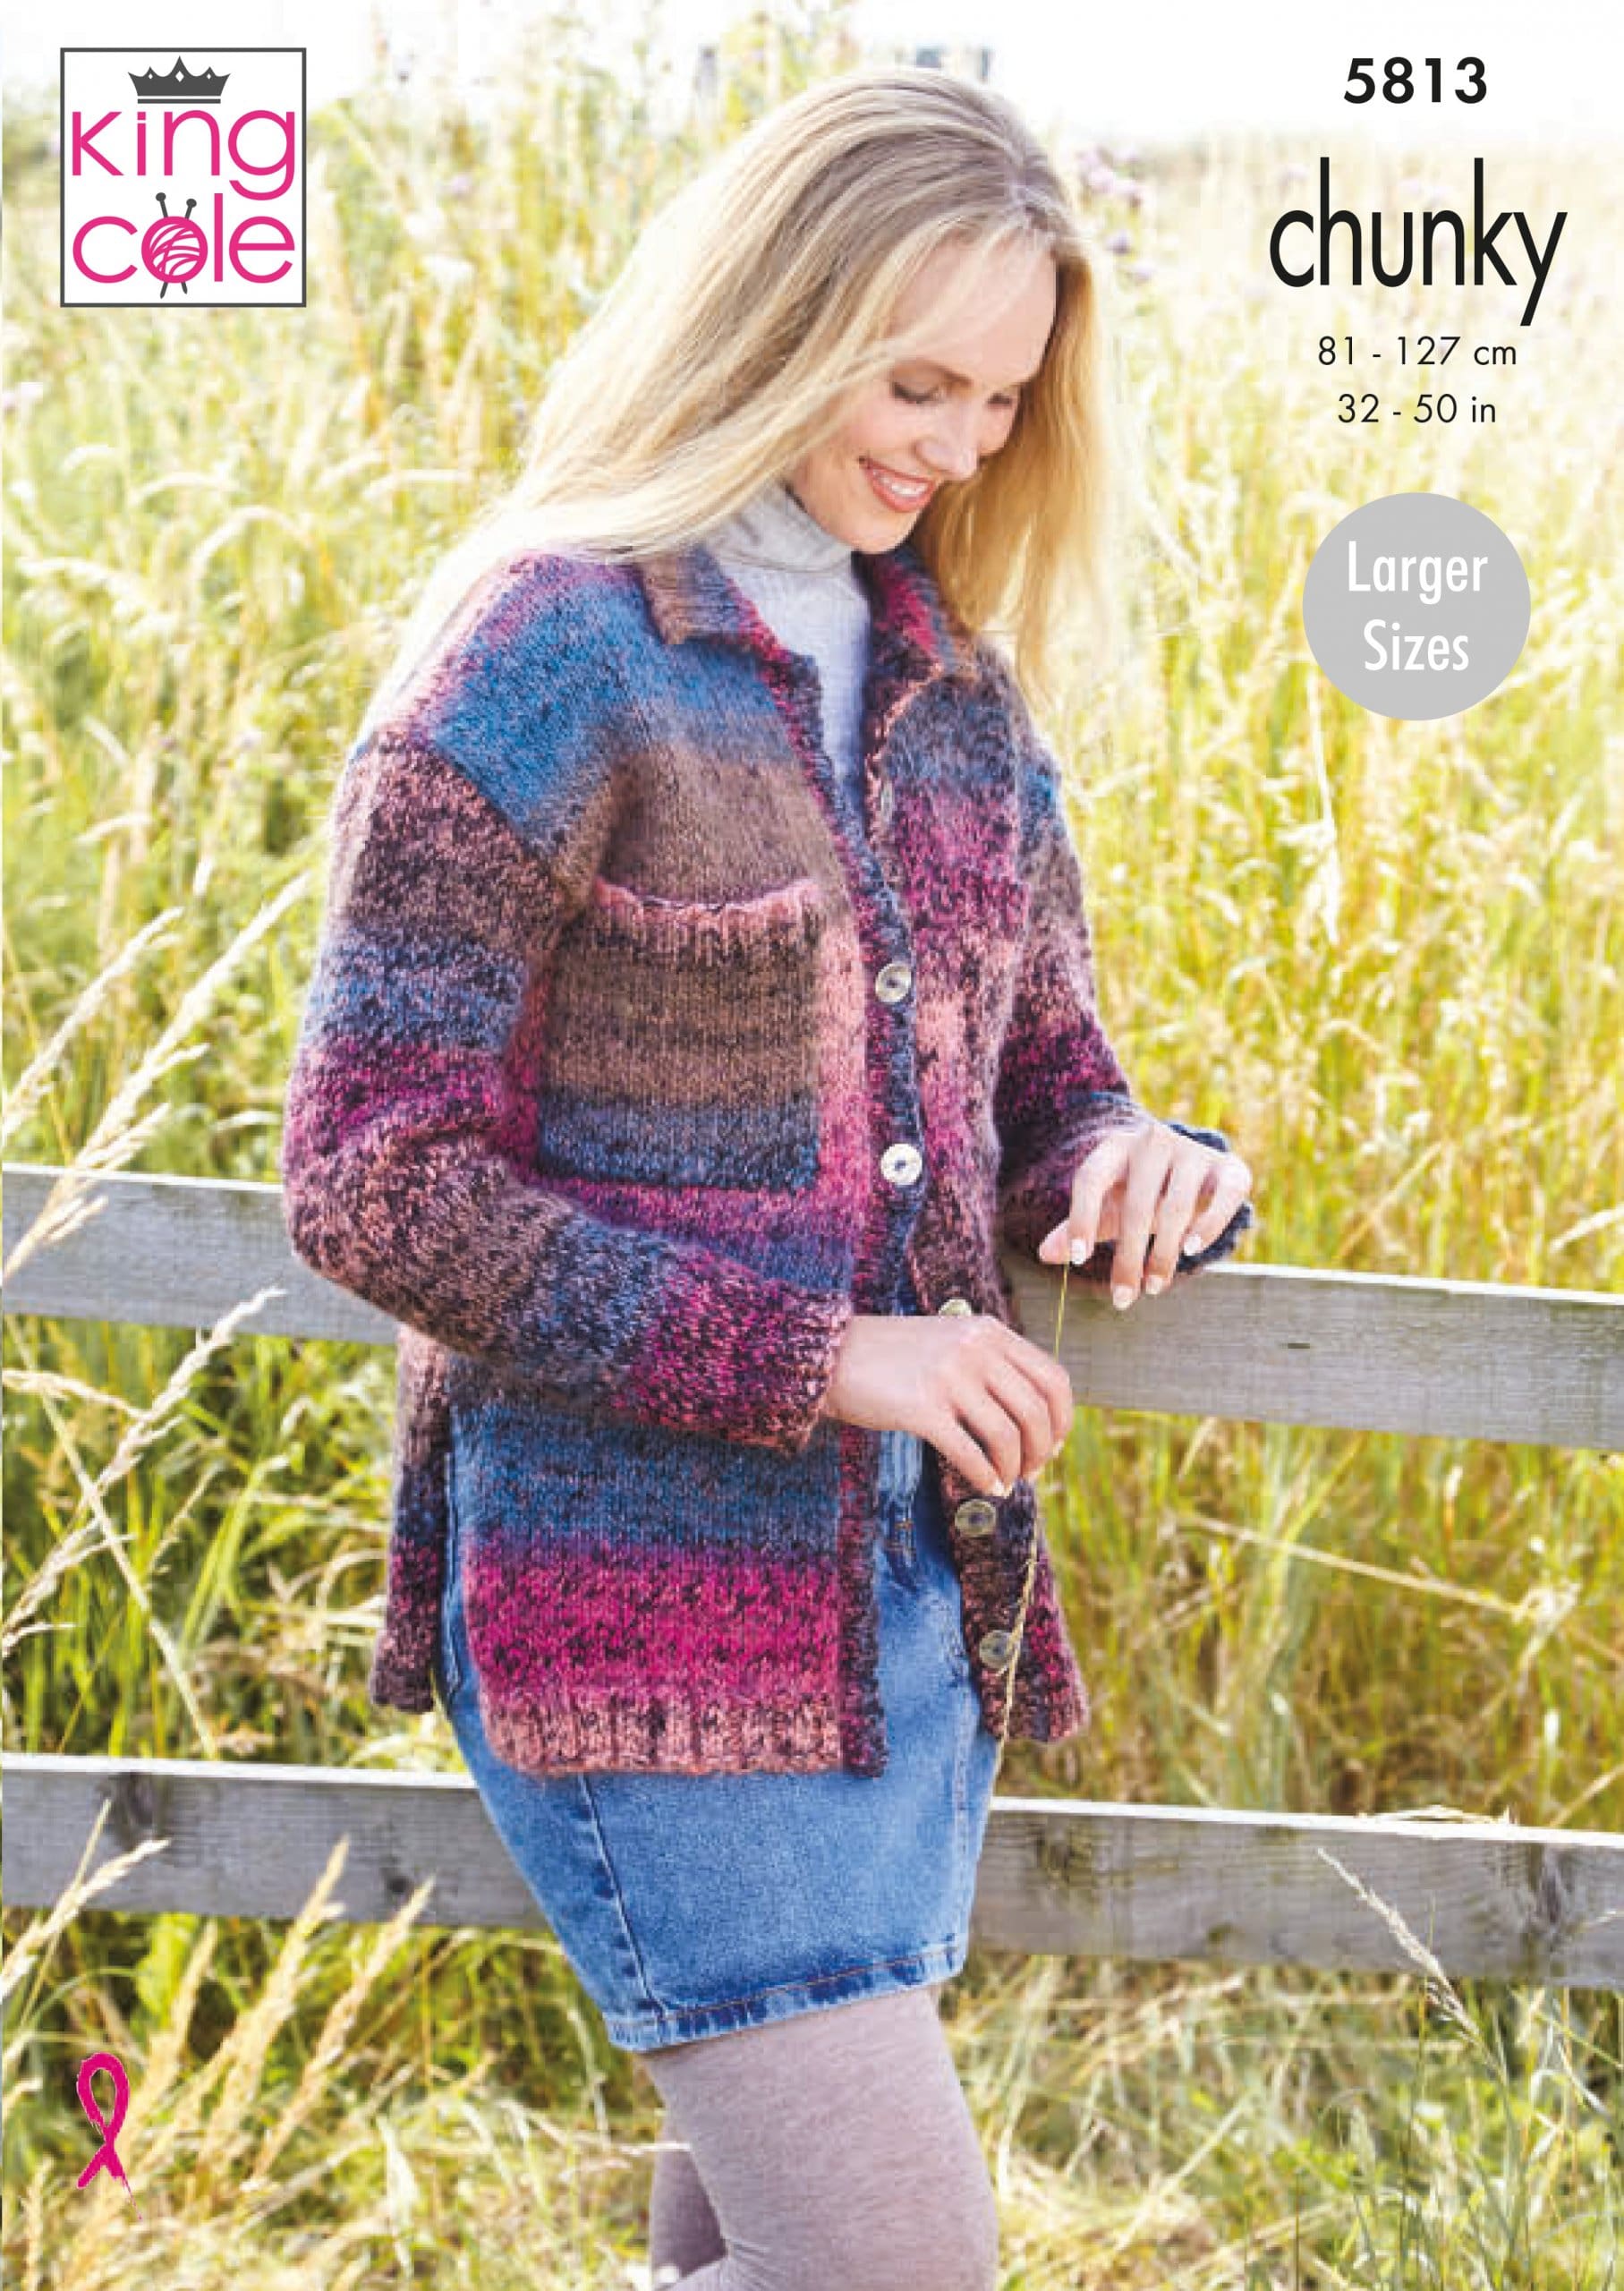 Easy to Follow Cardigans Knitted in Autumn Chunky Knitting Patterns ...